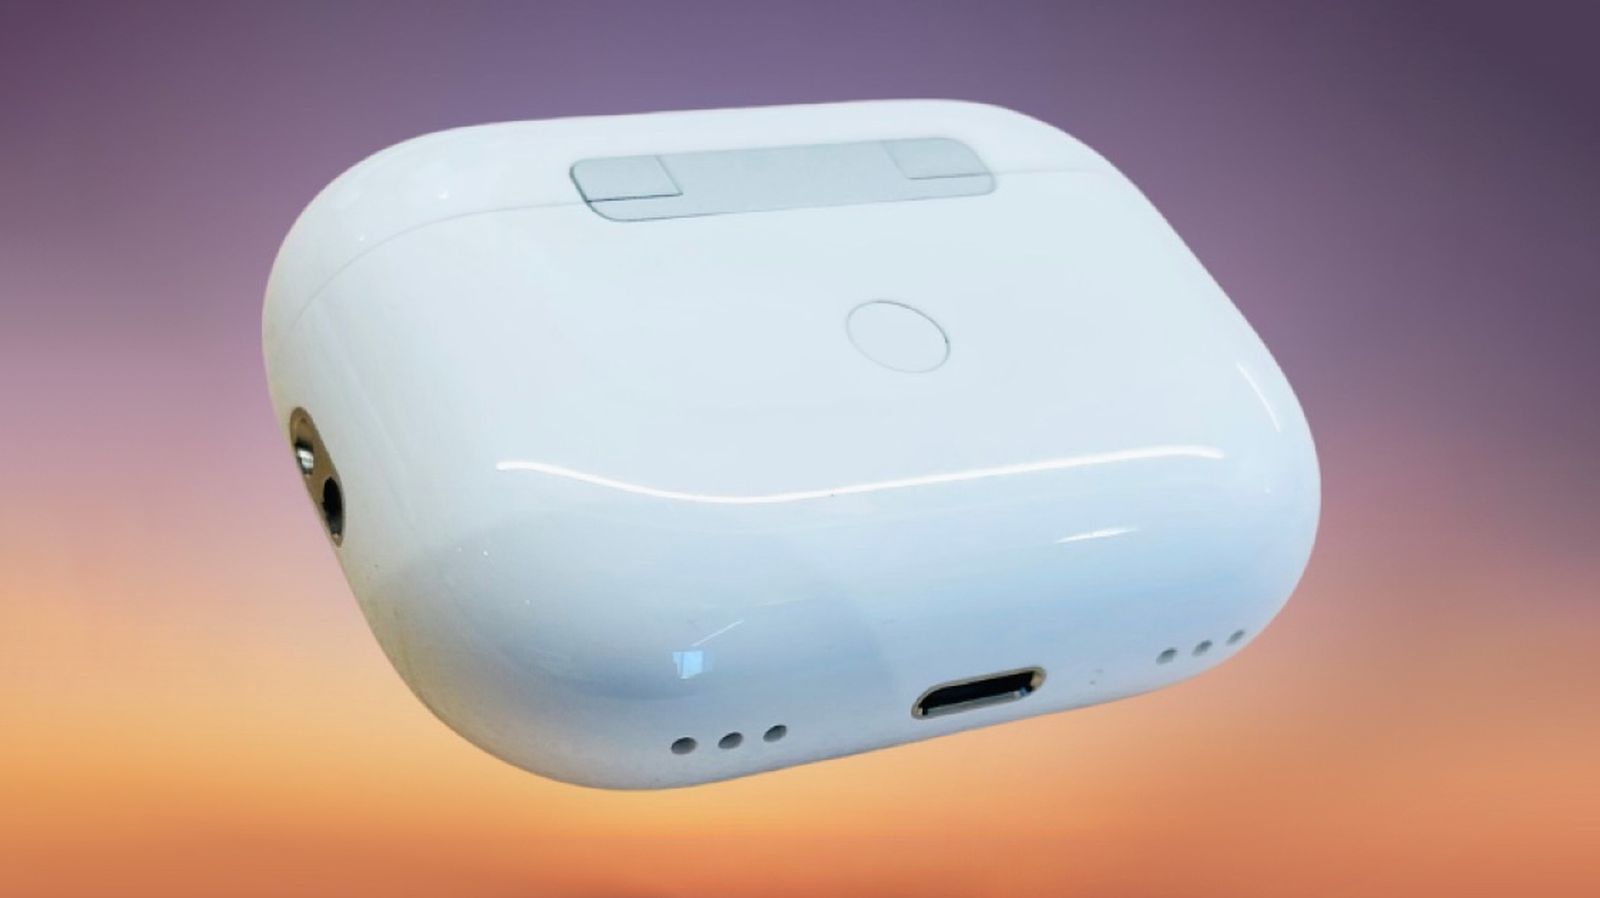 Photos Depict Alleged AirPods Pro 2 With Same Design, Case With